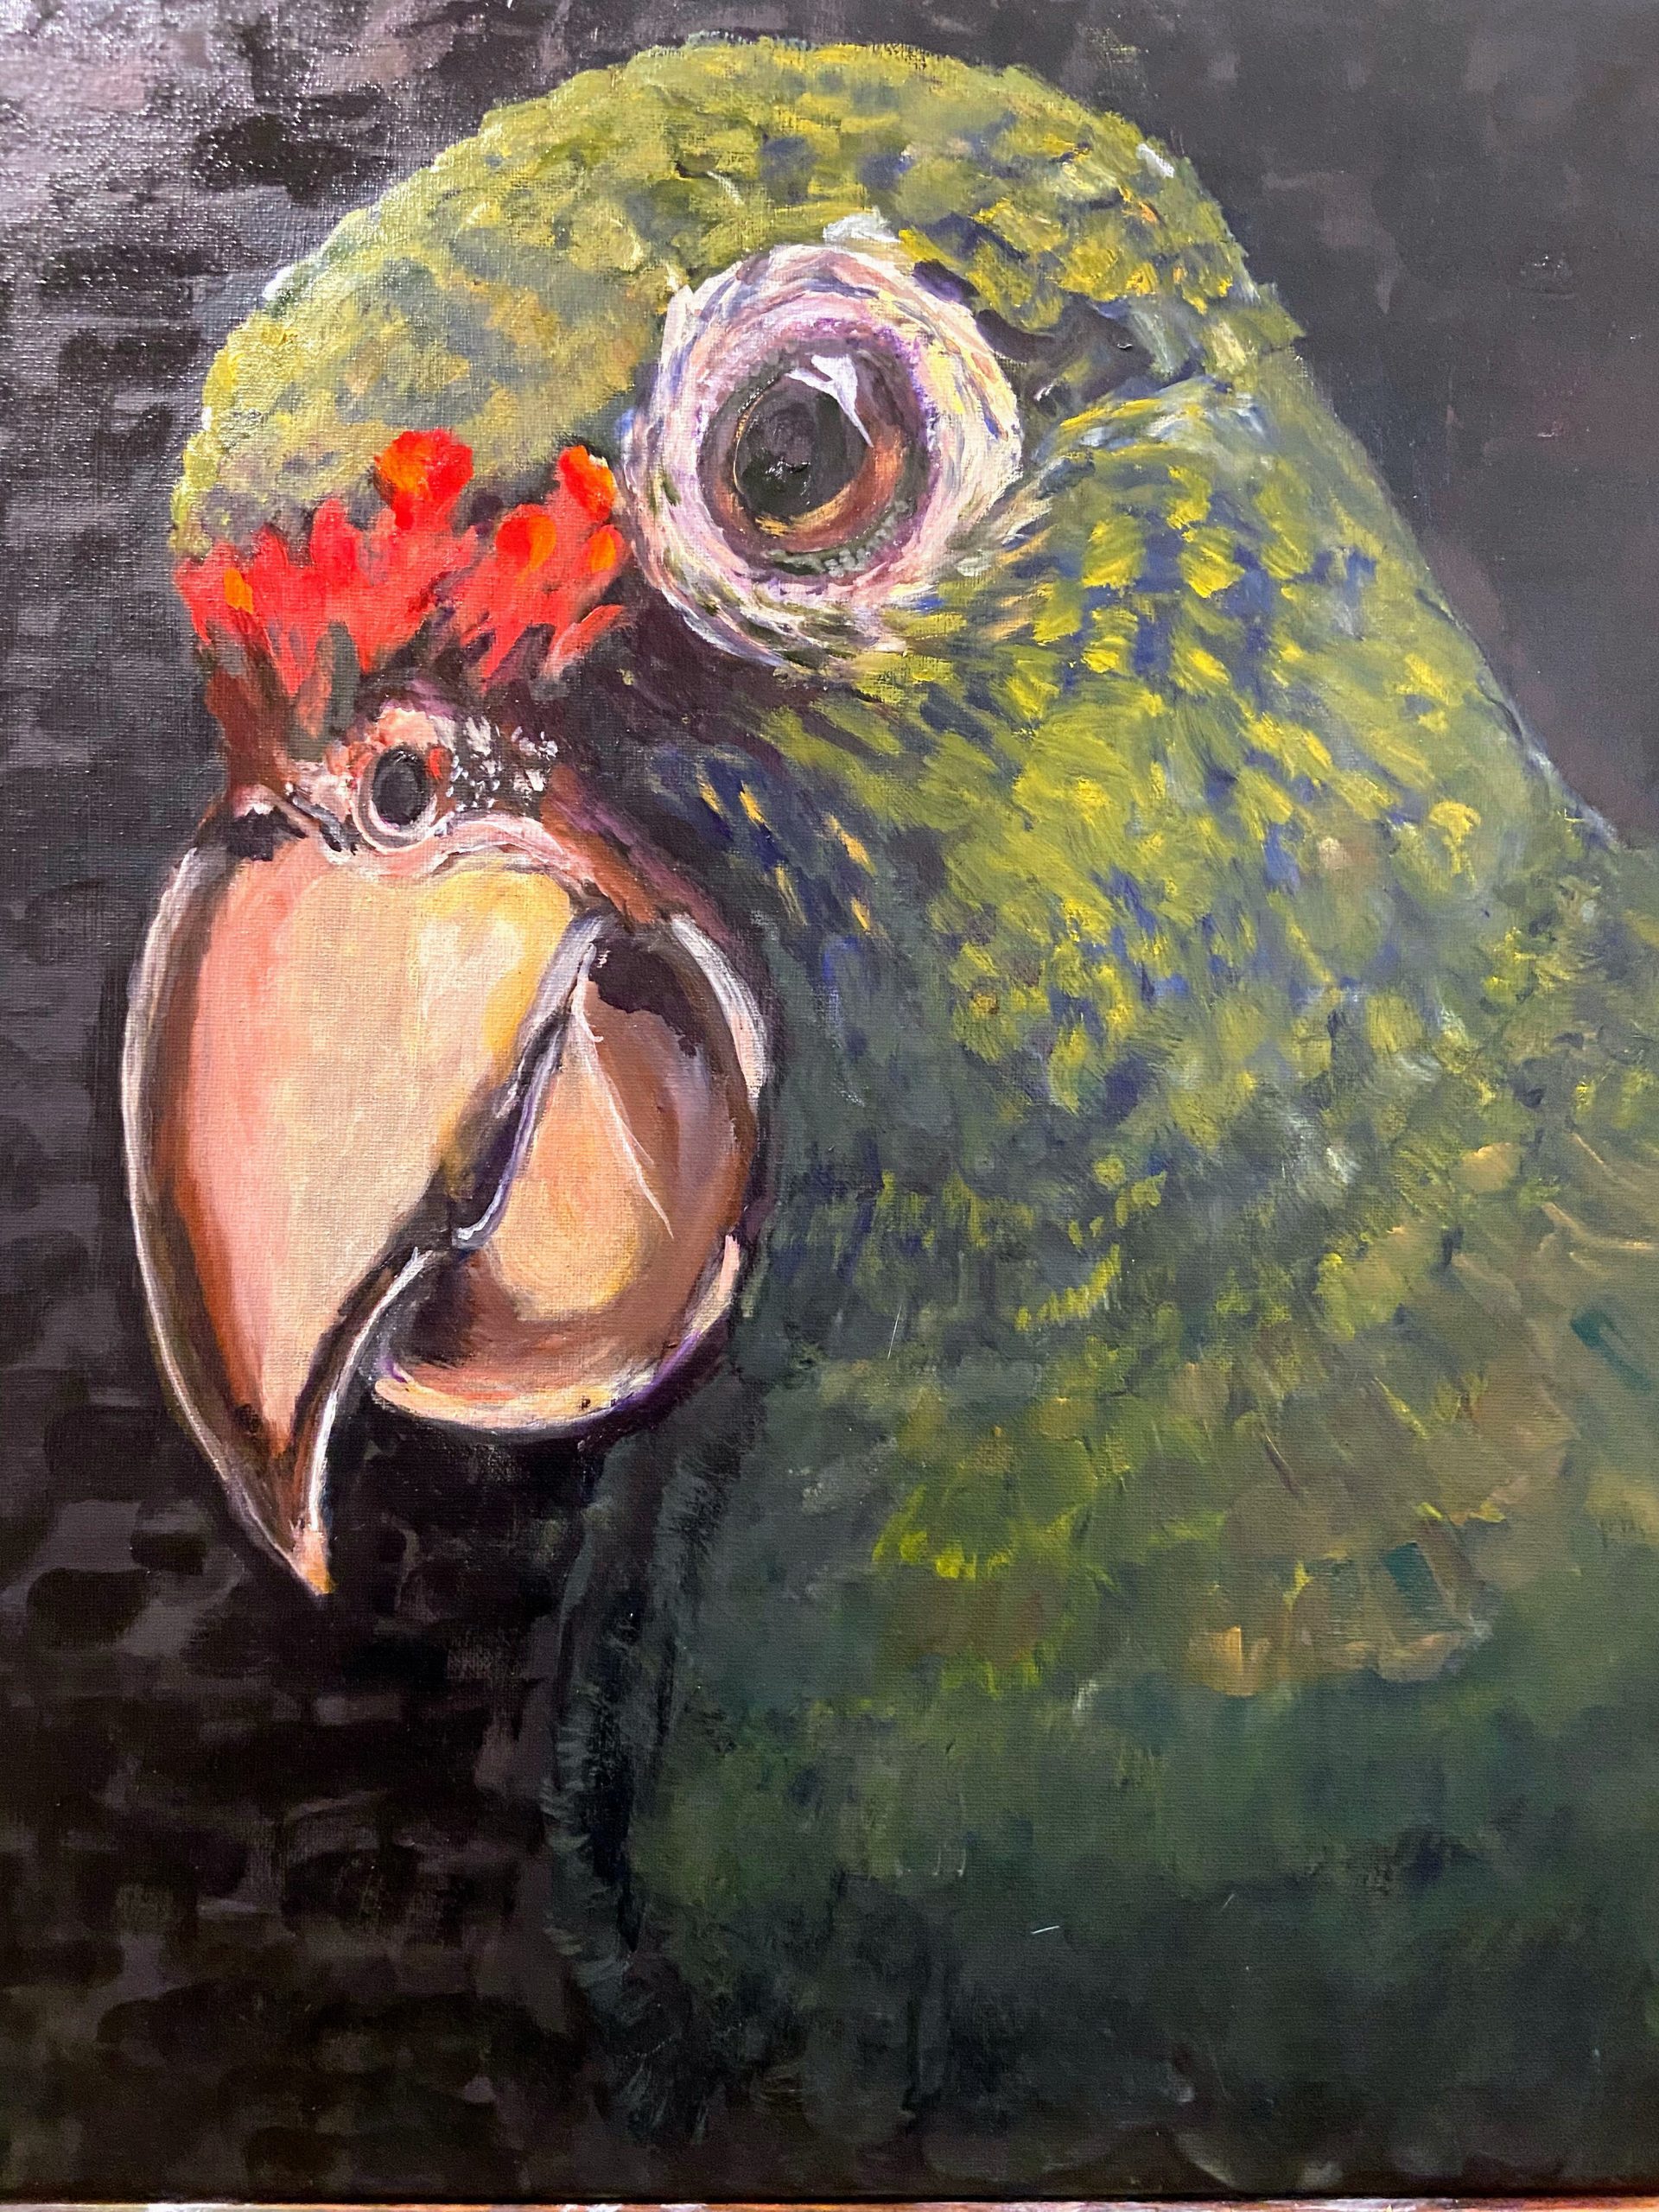 Finished oil painting of a parrot head using optical mixing